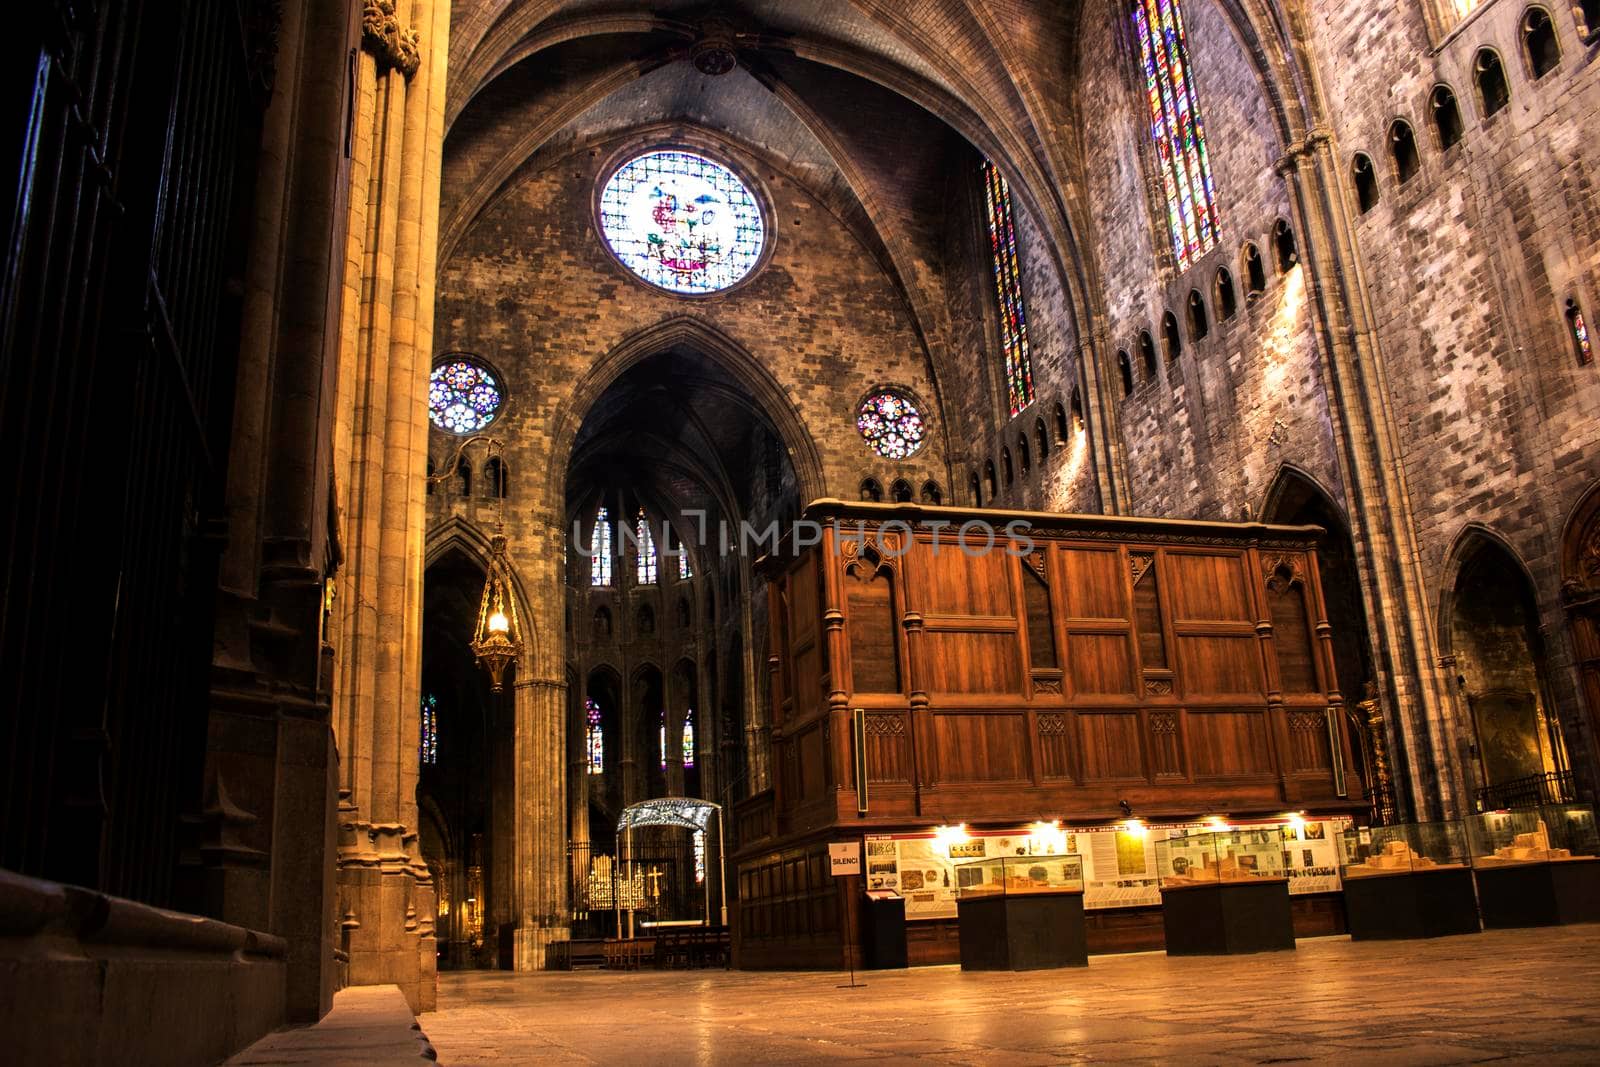 Interior view of Girona Cathedral, also known as the Cathedral of Saint Mary of Girona, a Roman Catholic church located in Girona